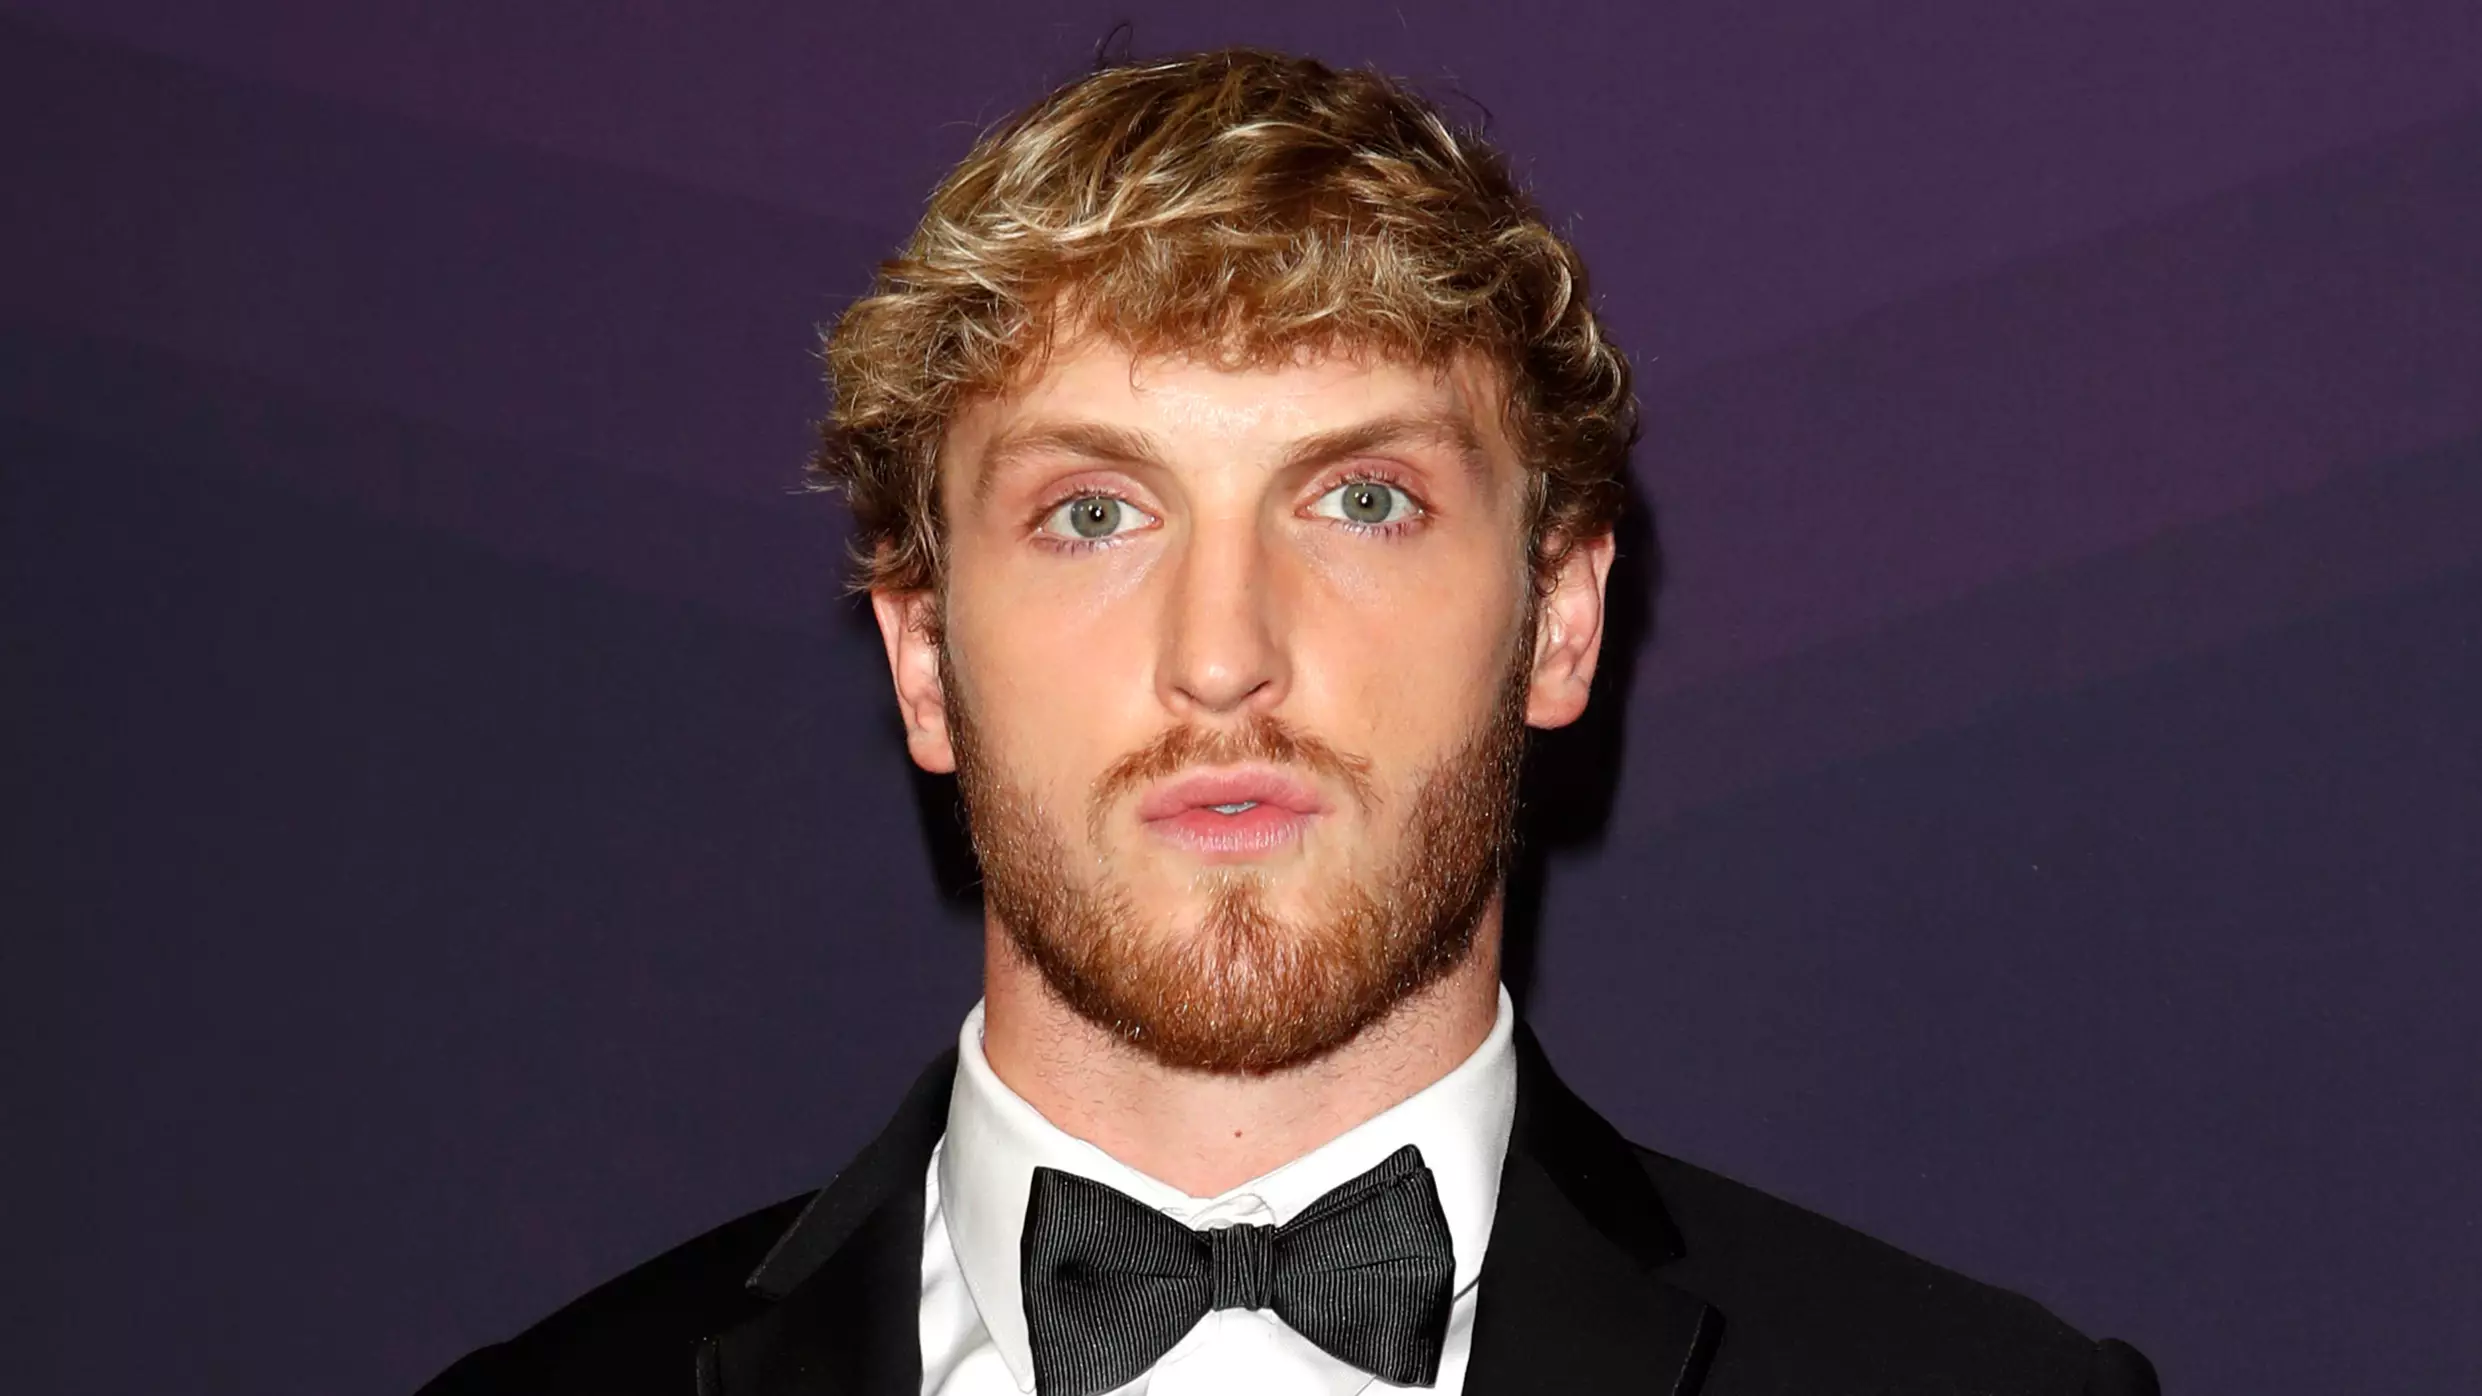 YouTuber Logan Paul Is Offering $10,000 To Any Influencer Who Can Beat Him In A Wrestling Match